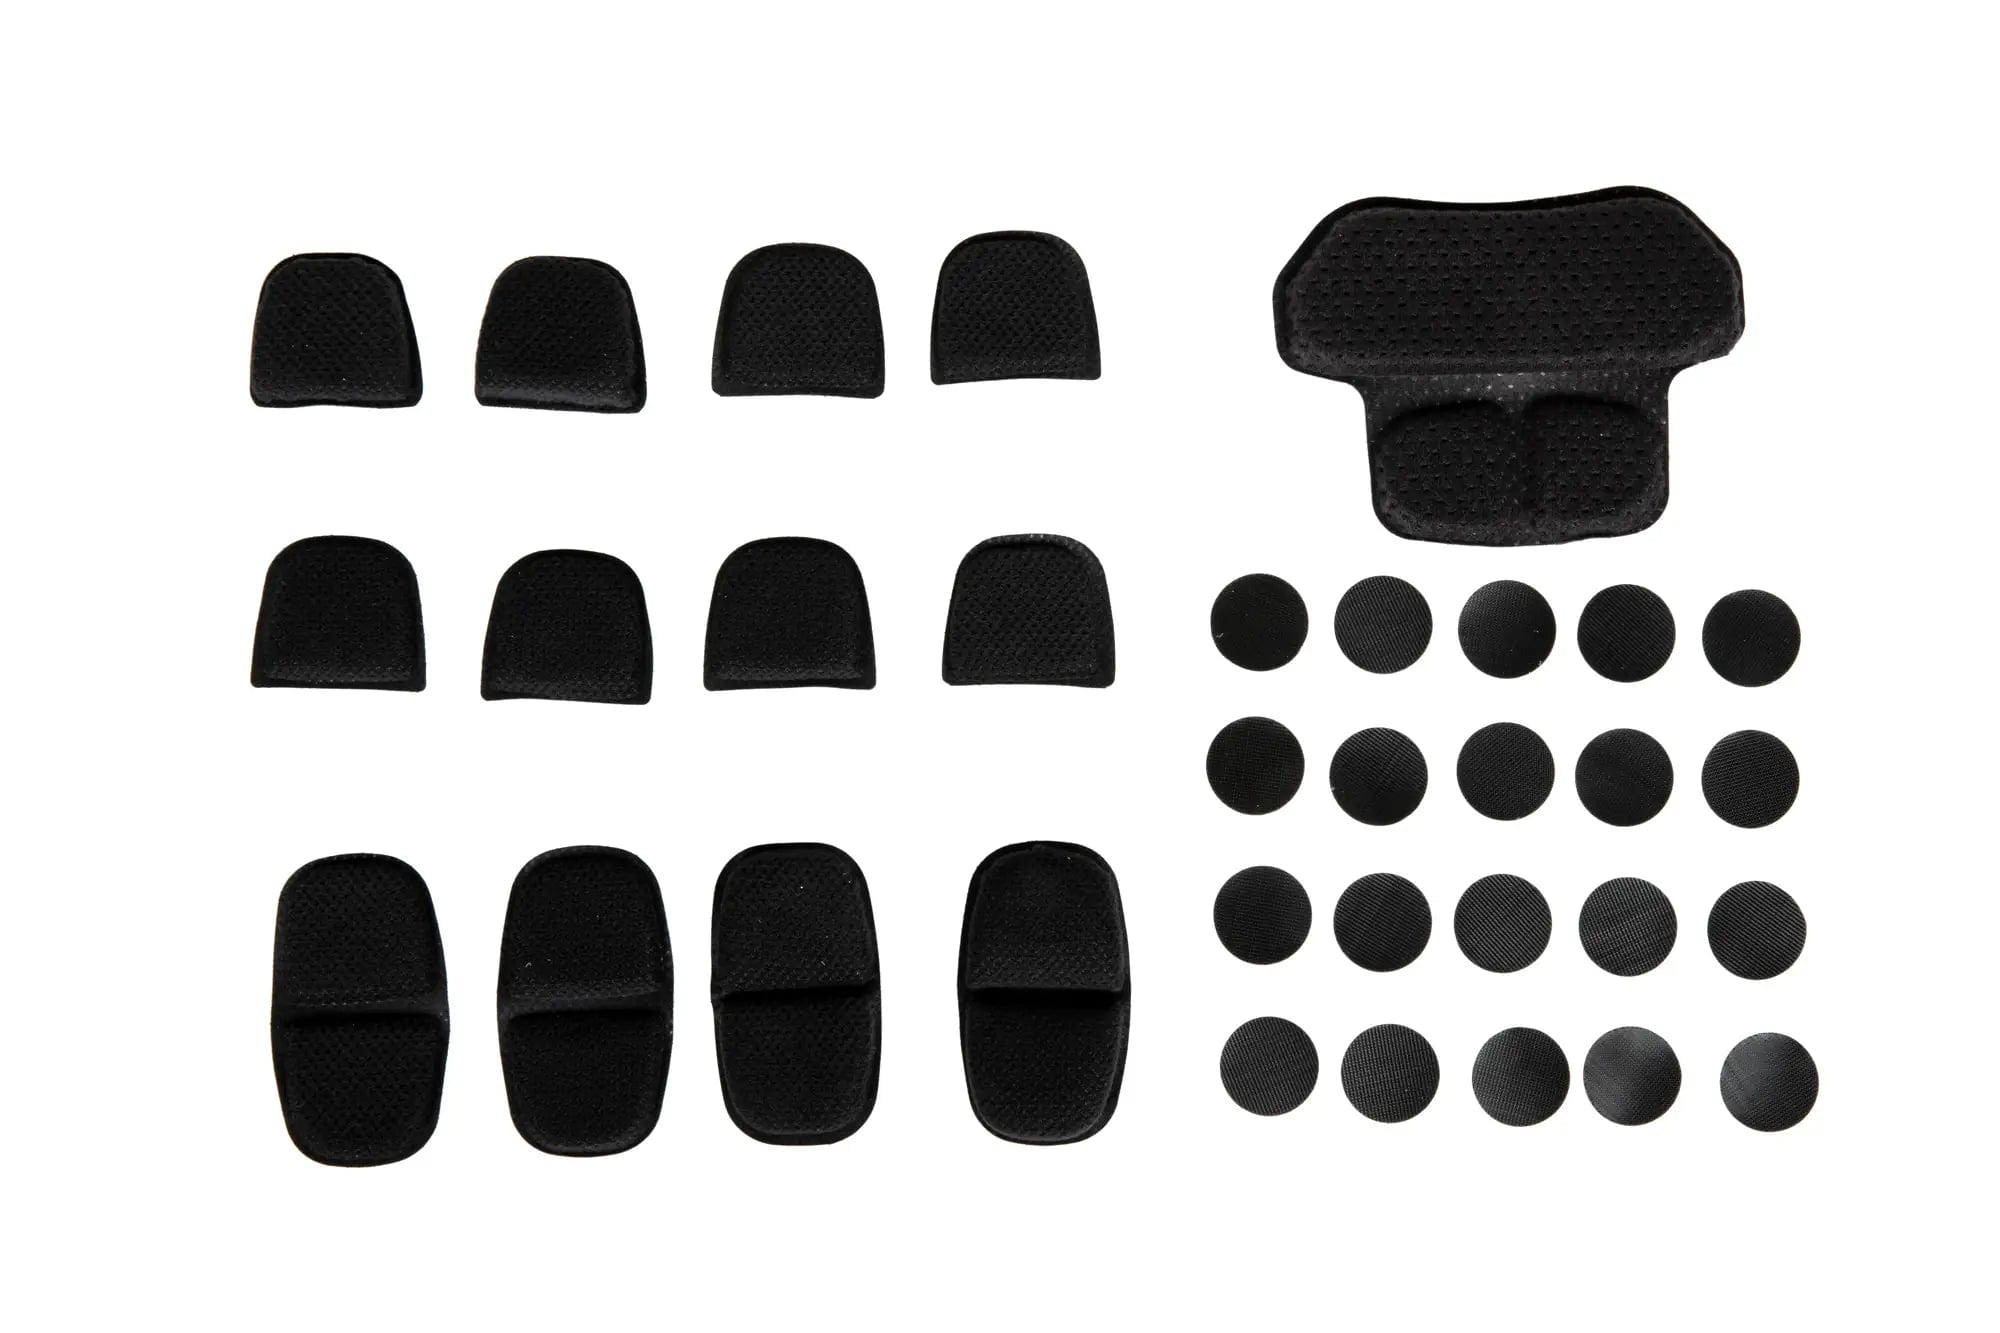 Protective Pads for Super High Cut Helmets